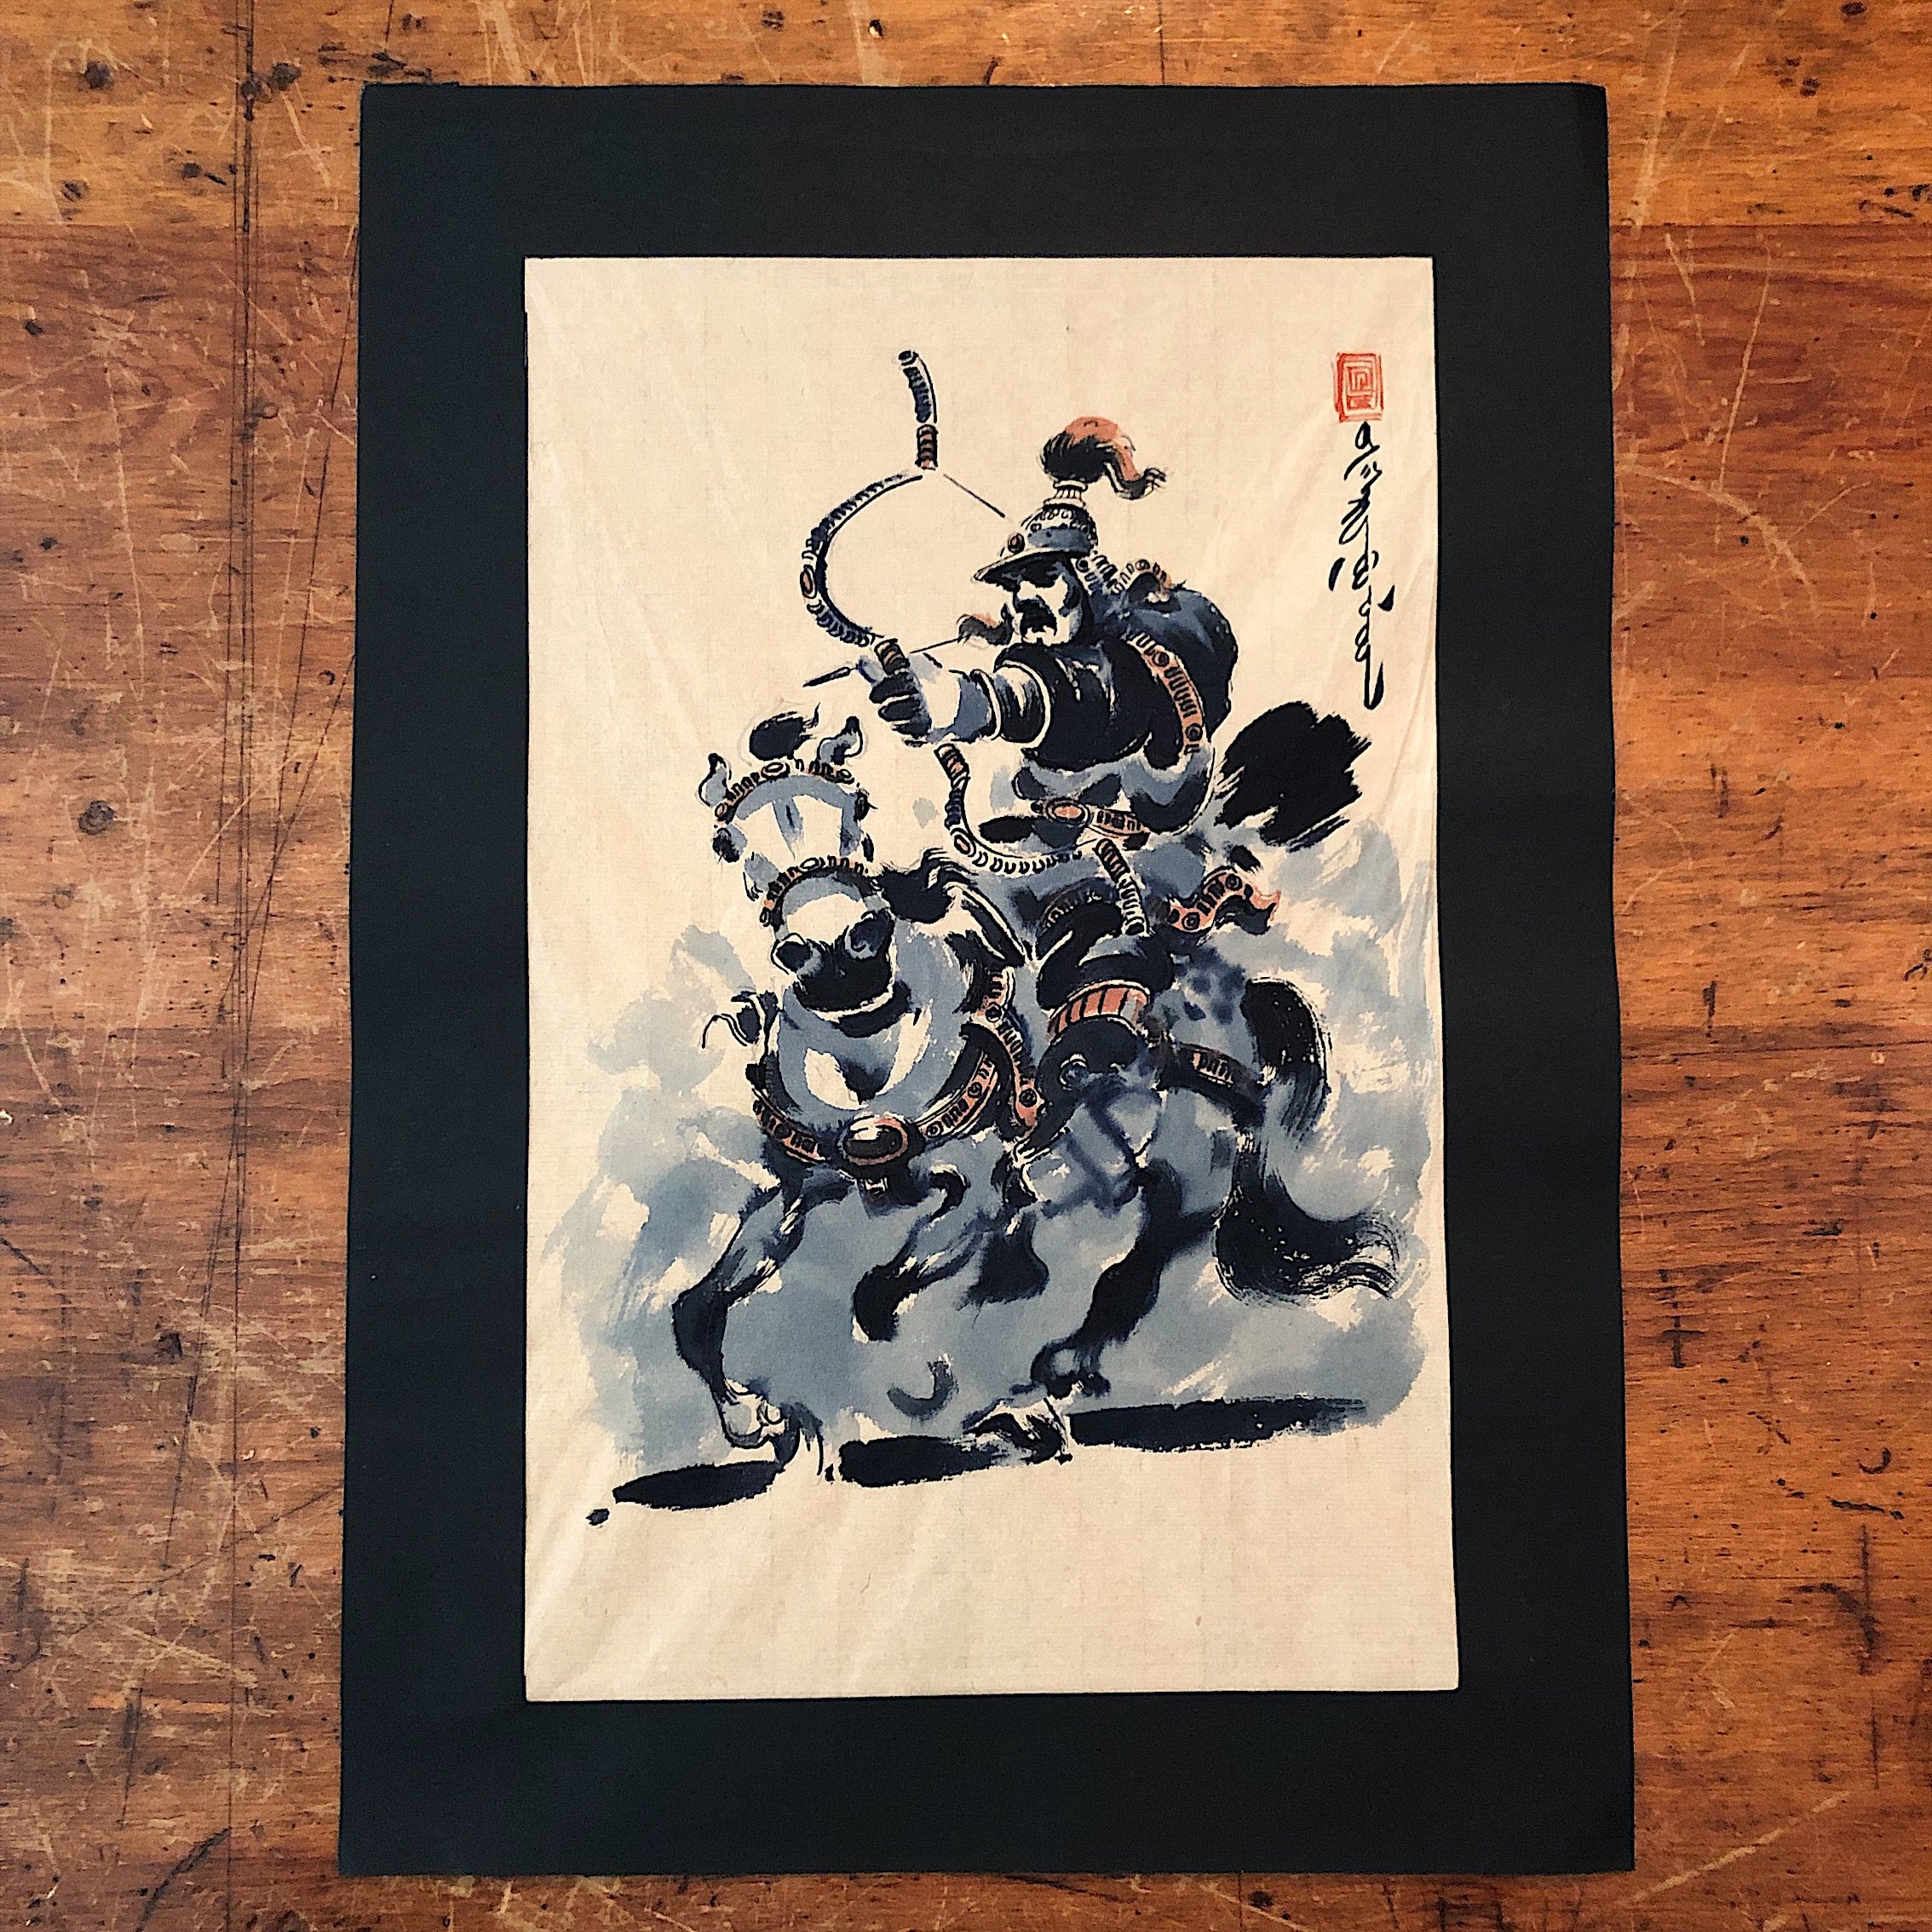 Chinese Ink Painting of Warrior and Horse in Battle - In the Manner of Huang Zhou - 1990s? - Signed and Stamped 